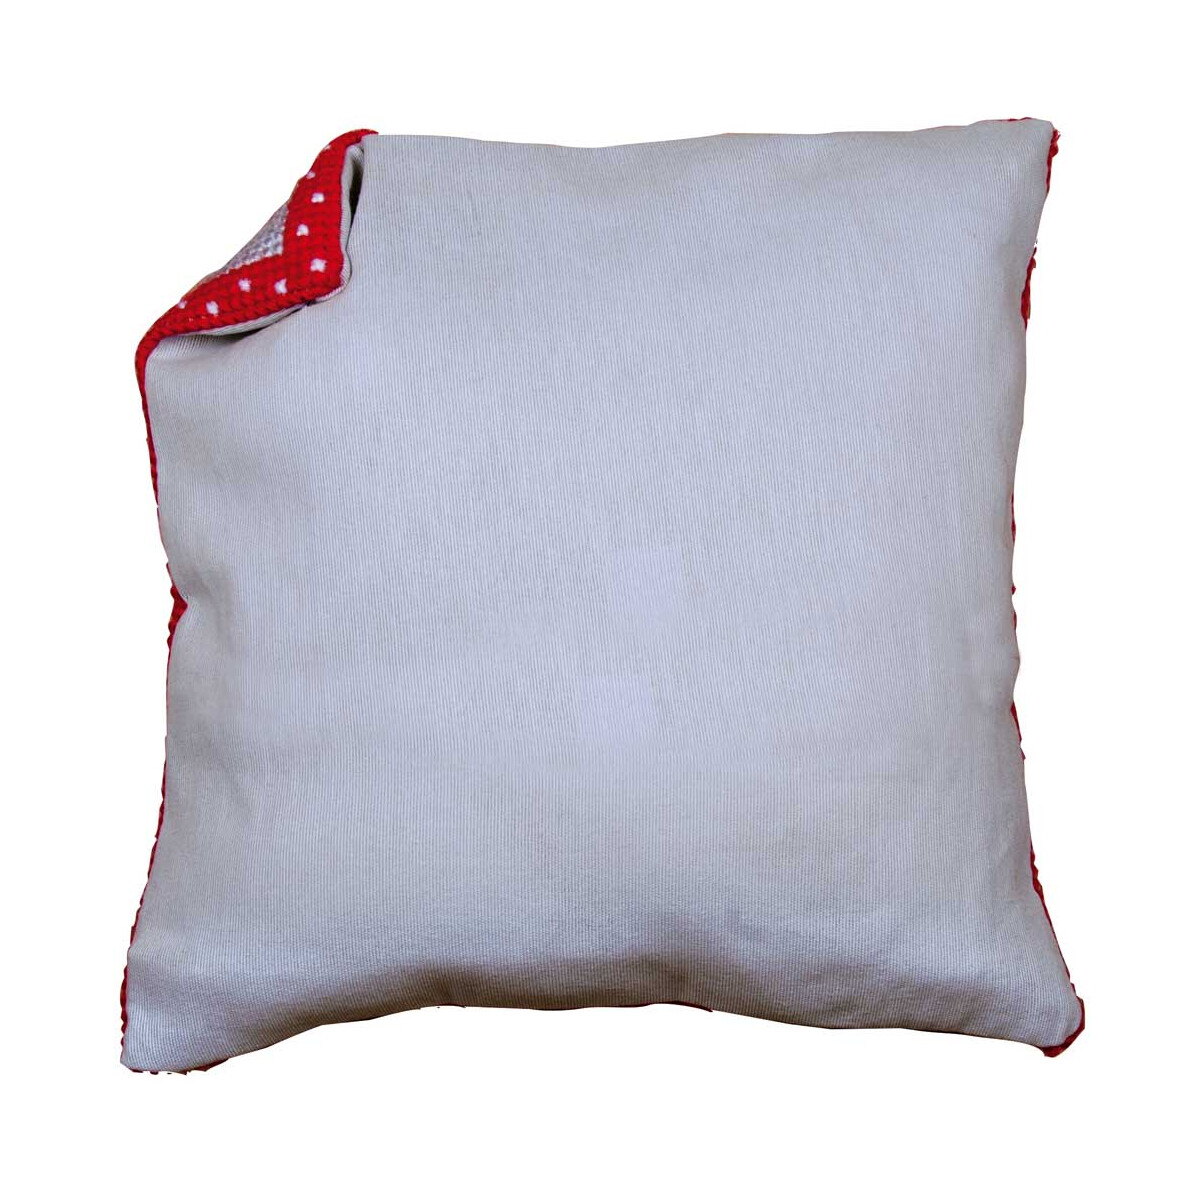 Vervaco Cushion Back without Zipper - Gray, 45 x 45 cm, DIY